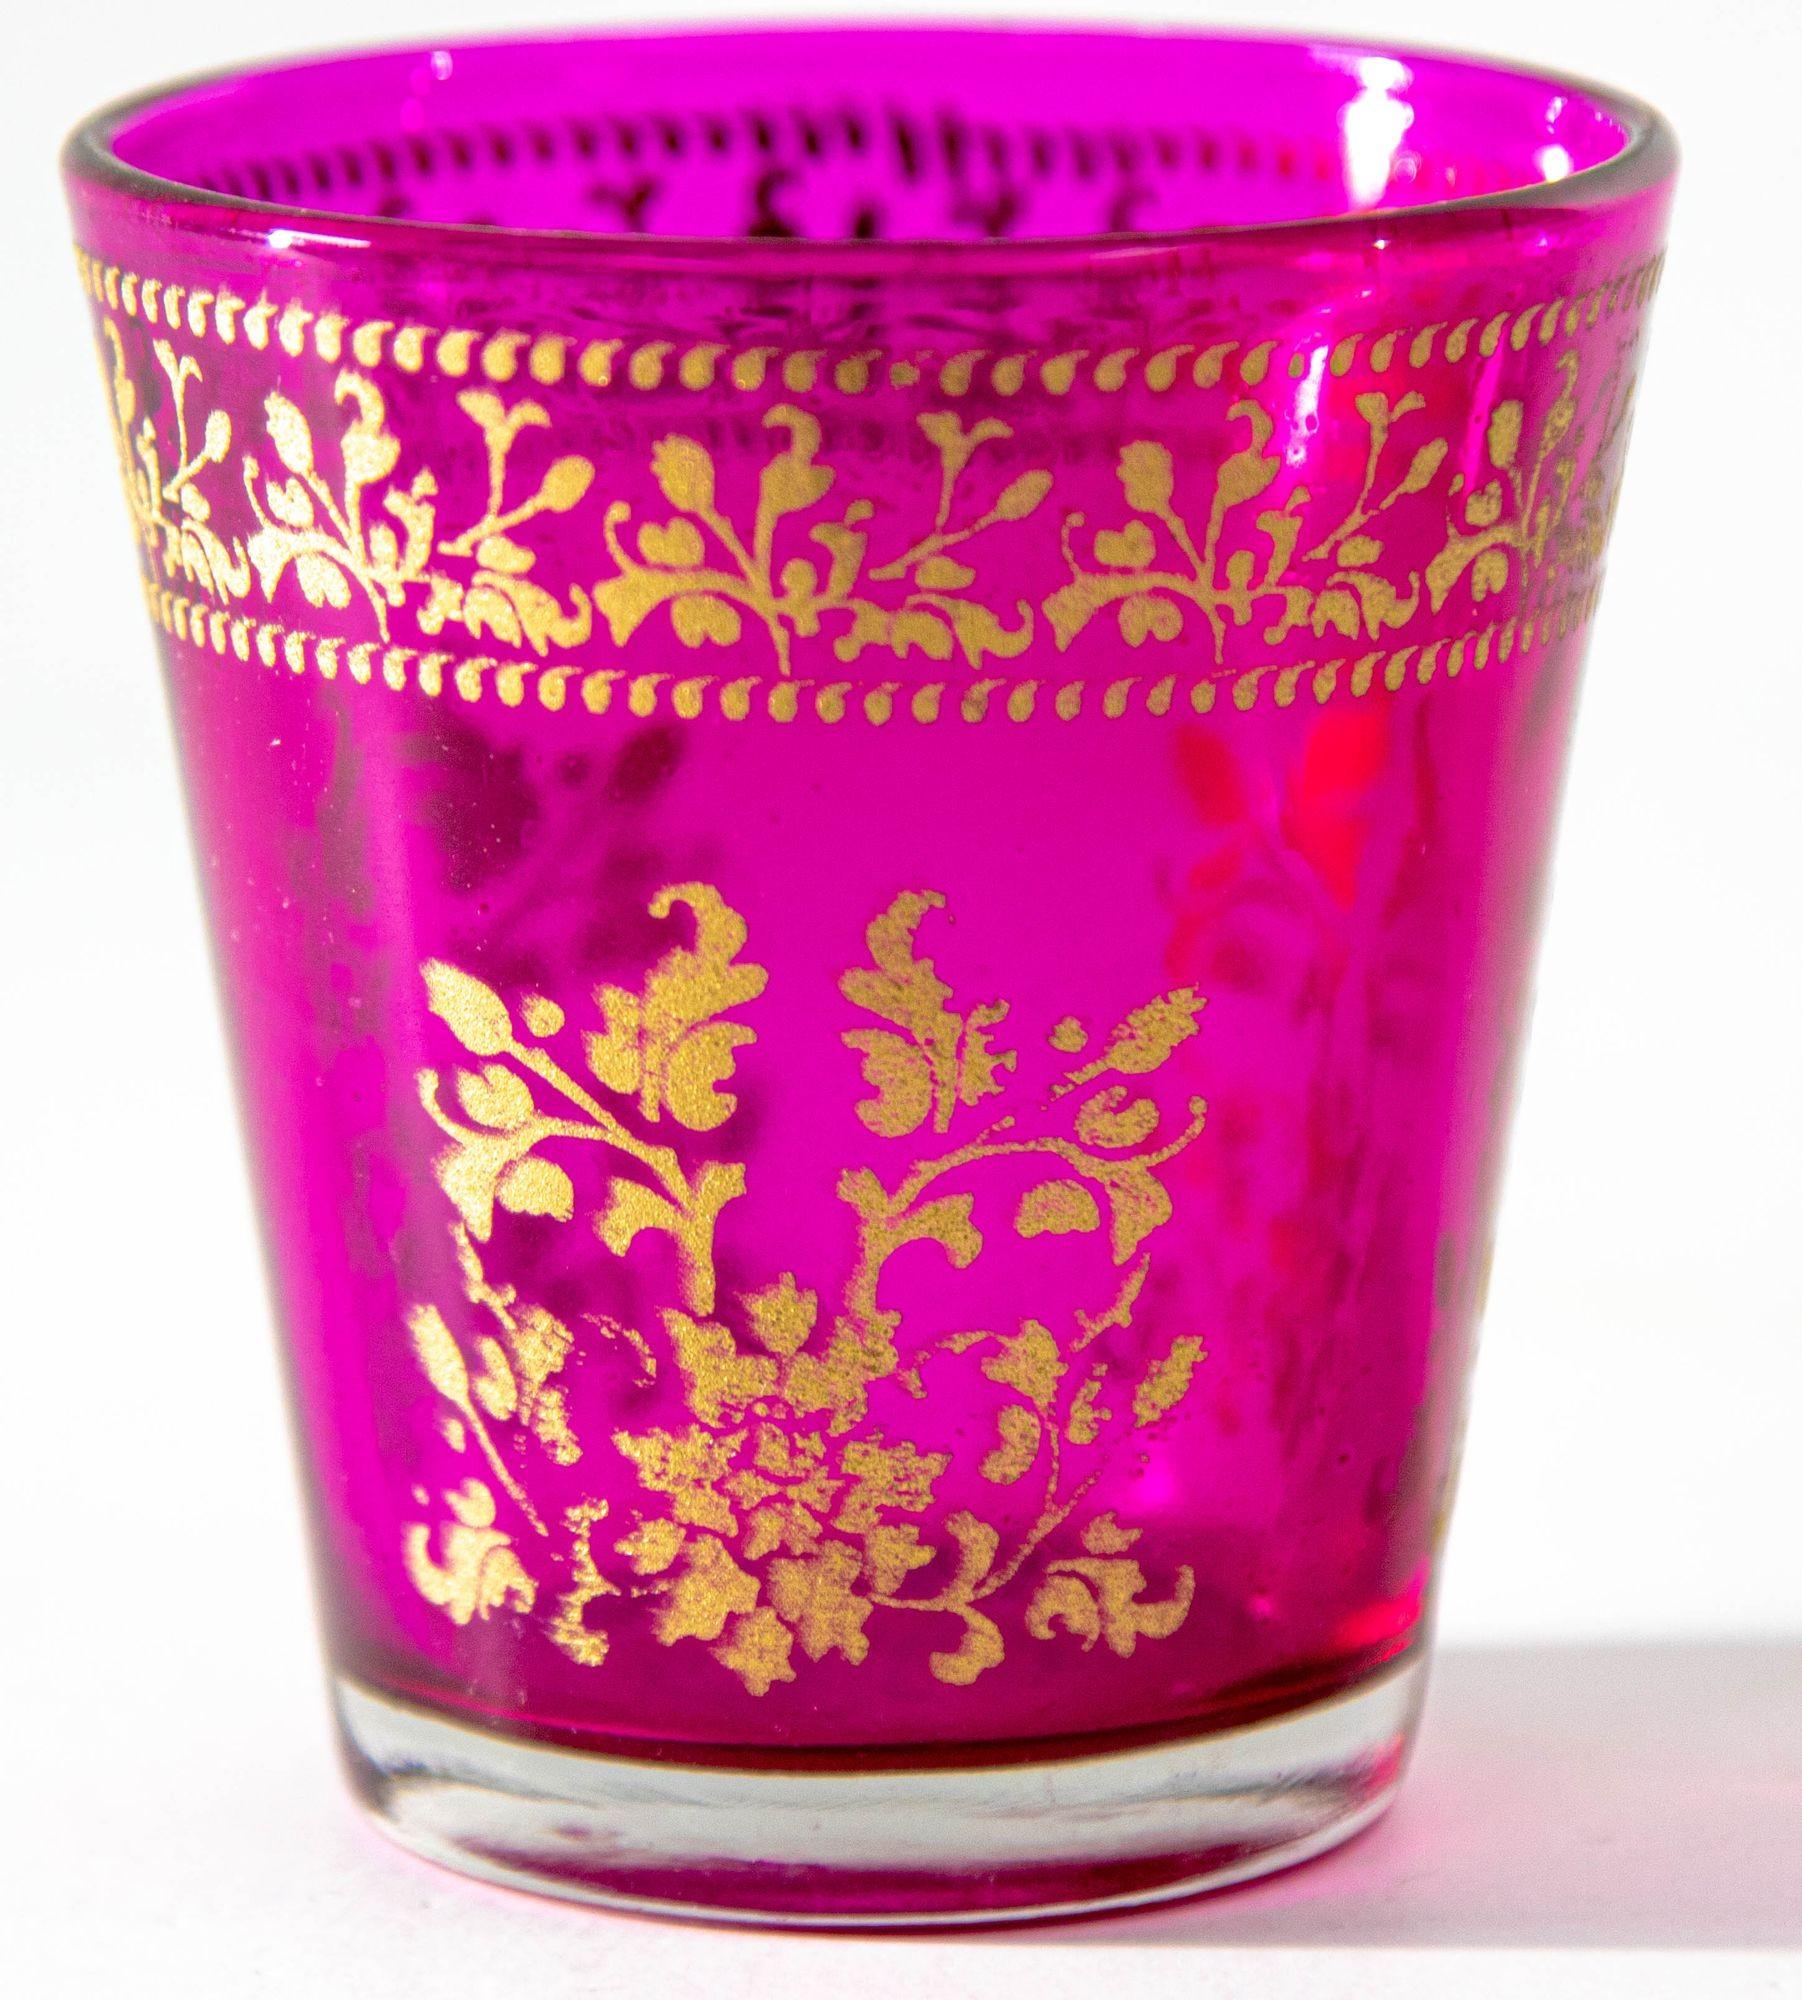 Luxe Moroccan Fuchsia pink and gold glass votive holder with 22K gold leaf Moorish floral design.
Moroccan pink and gold glass votive holder luxurious look, use it with a tea light, or just to add some happy color to your interior.
Will add the